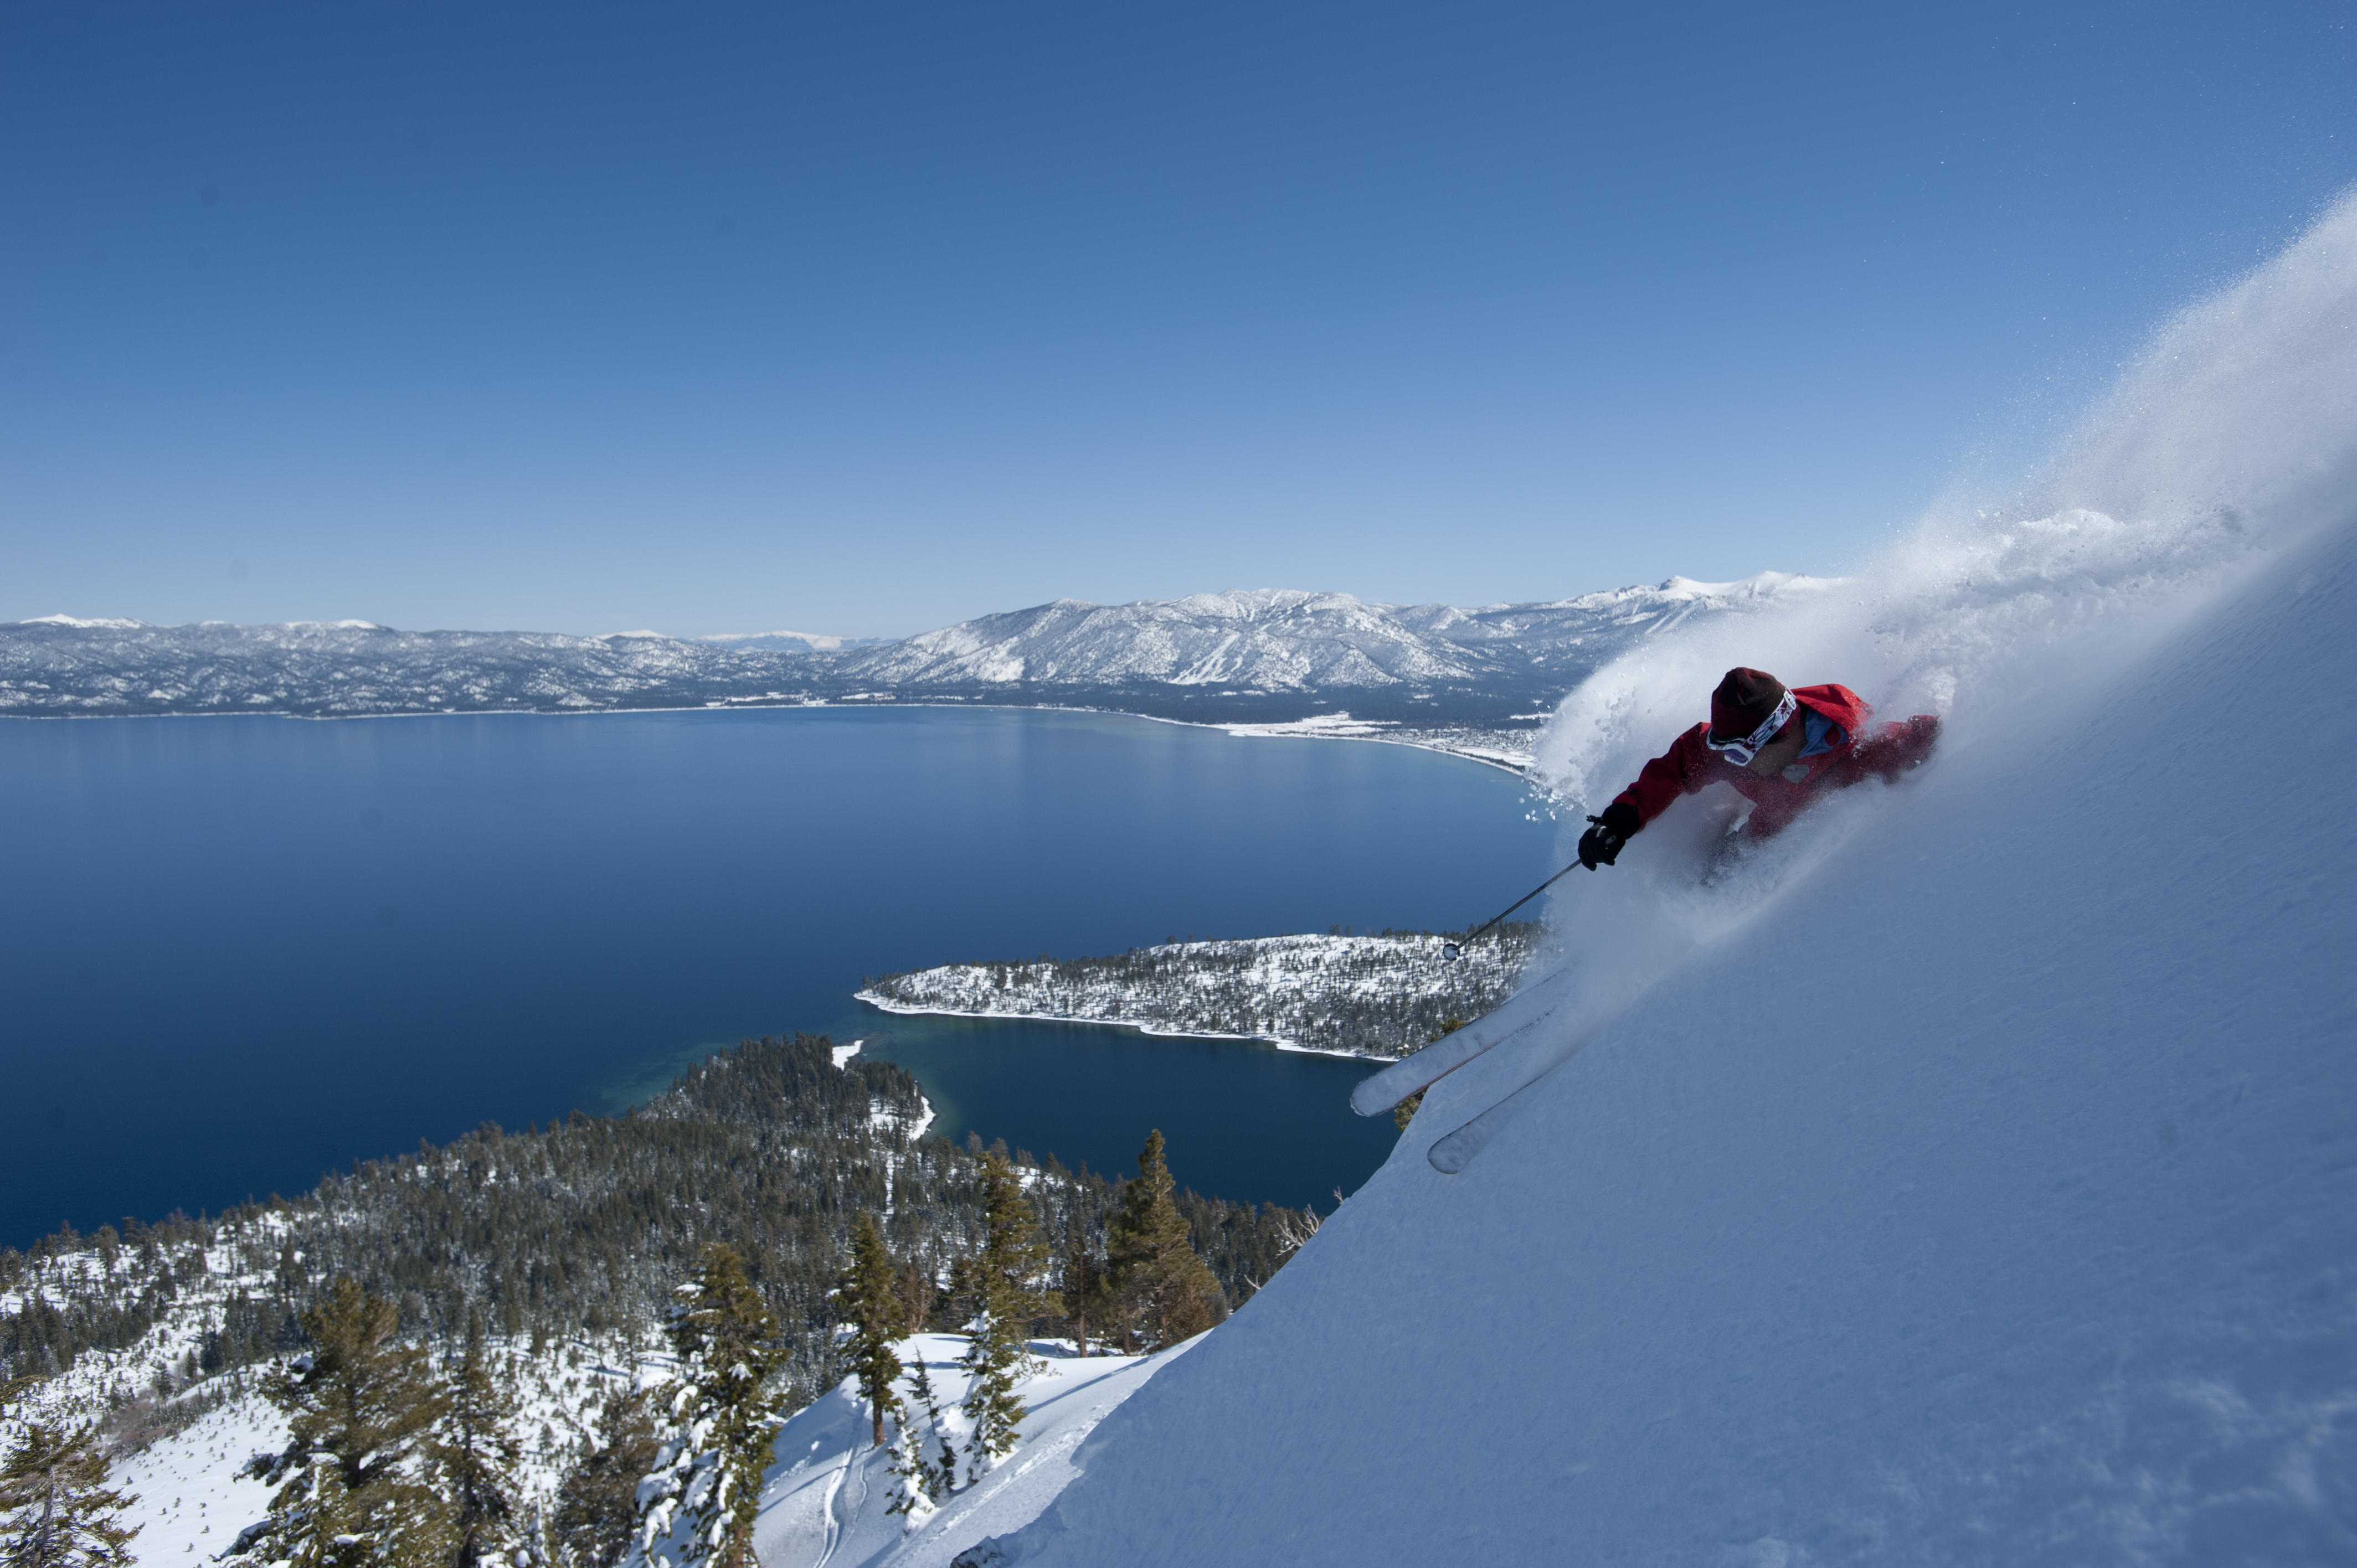 A record-breaking year for many North American ski resorts, particularly in California. Mammoth received 20.5 feet of snow in January, more than any other month in recorded history, and will now be extending its season to July 4.